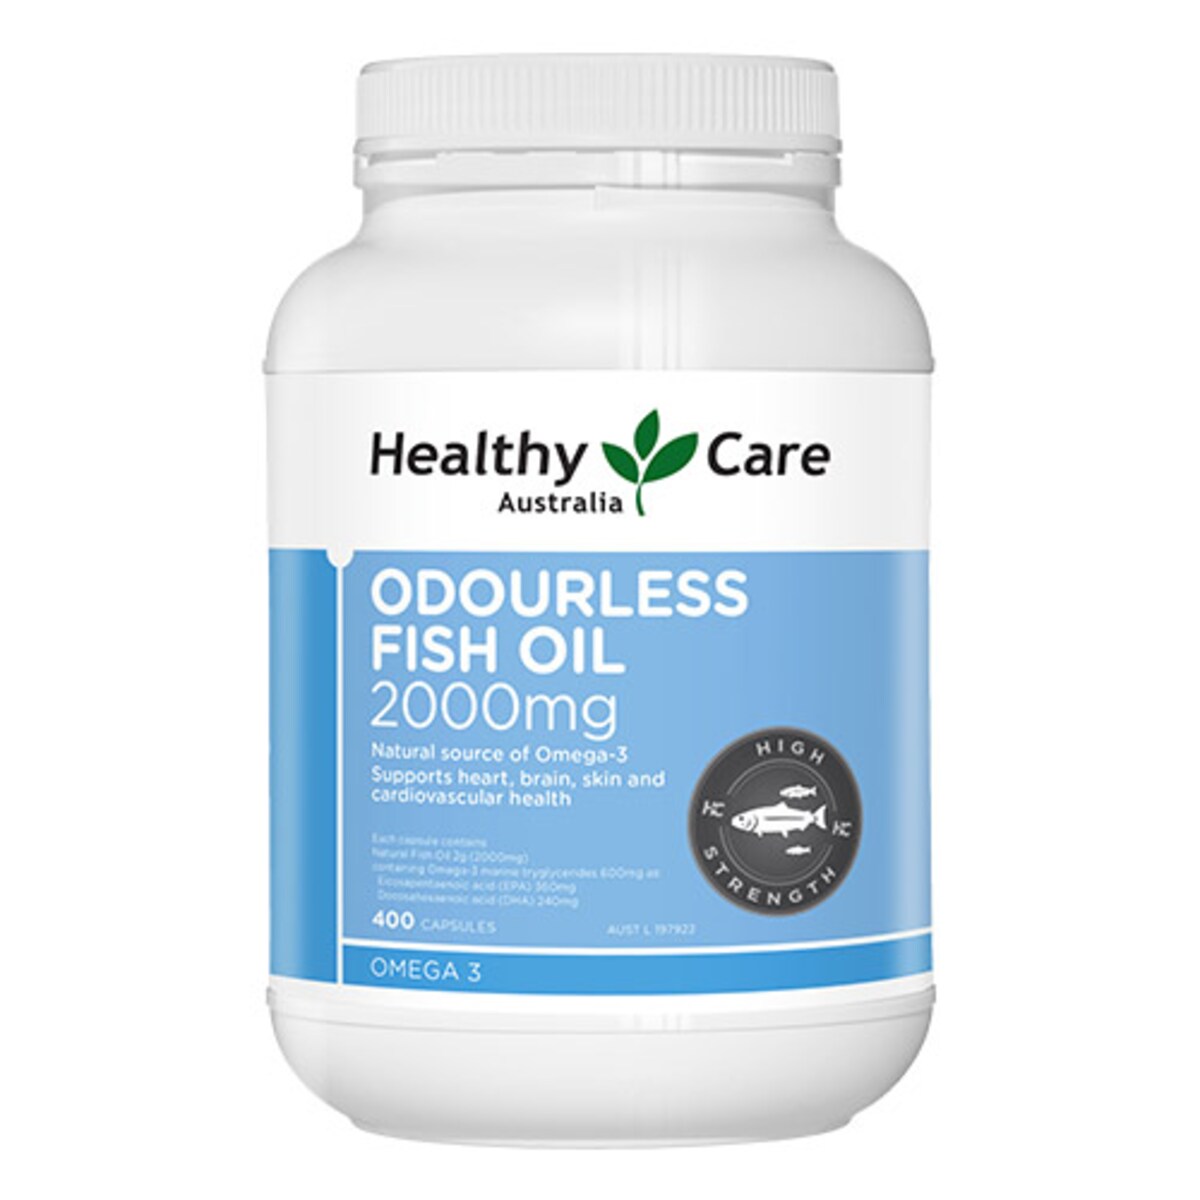 Healthy Care Odourless Fish Oil 2000mg 400 Capsules